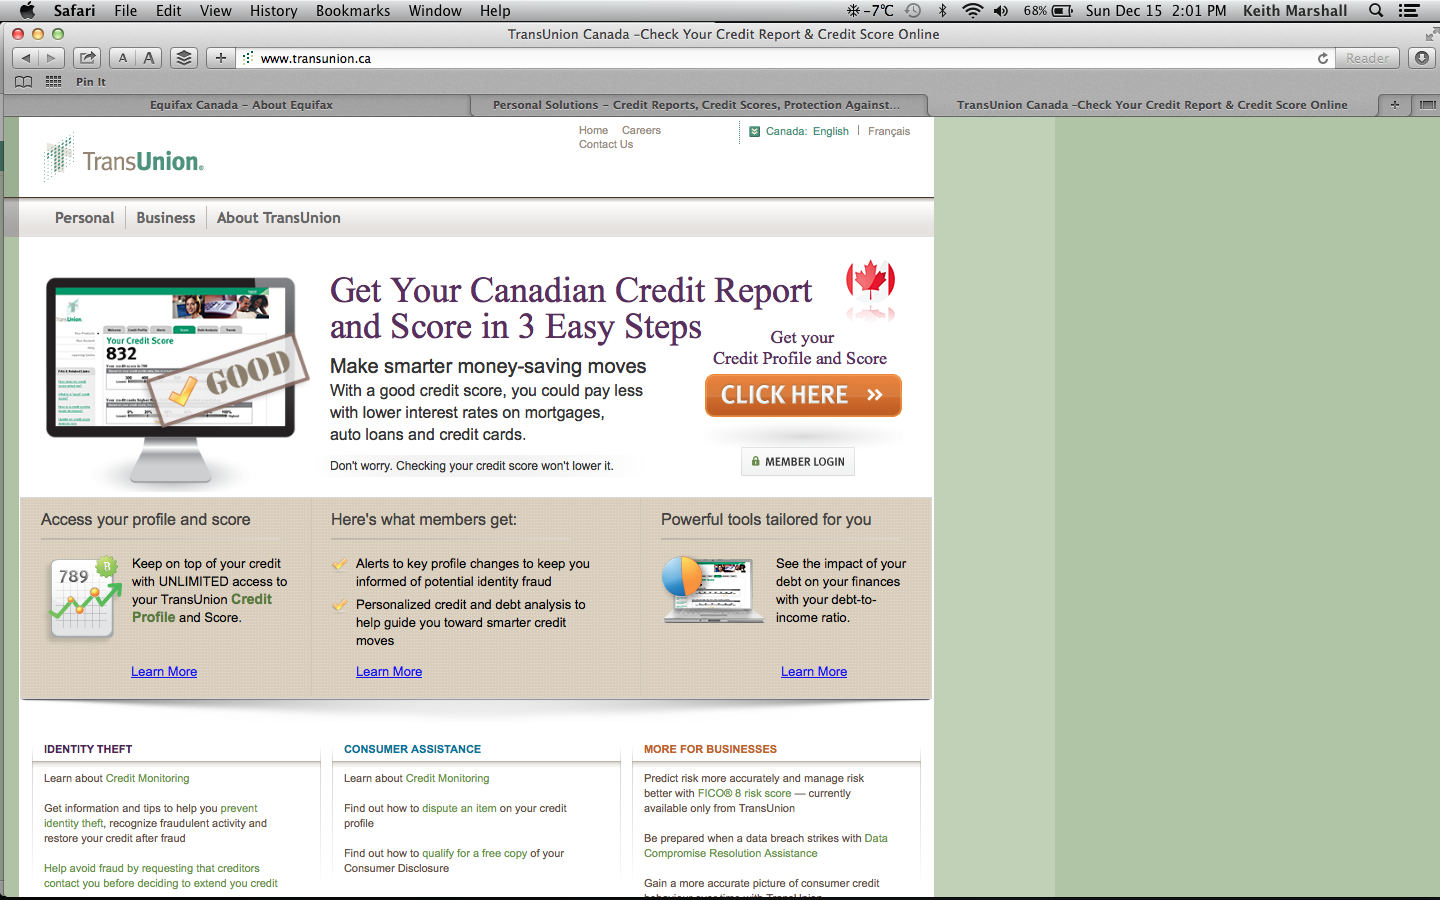 Where can I get my FREE credit report? - Keith Marshall, Realtor